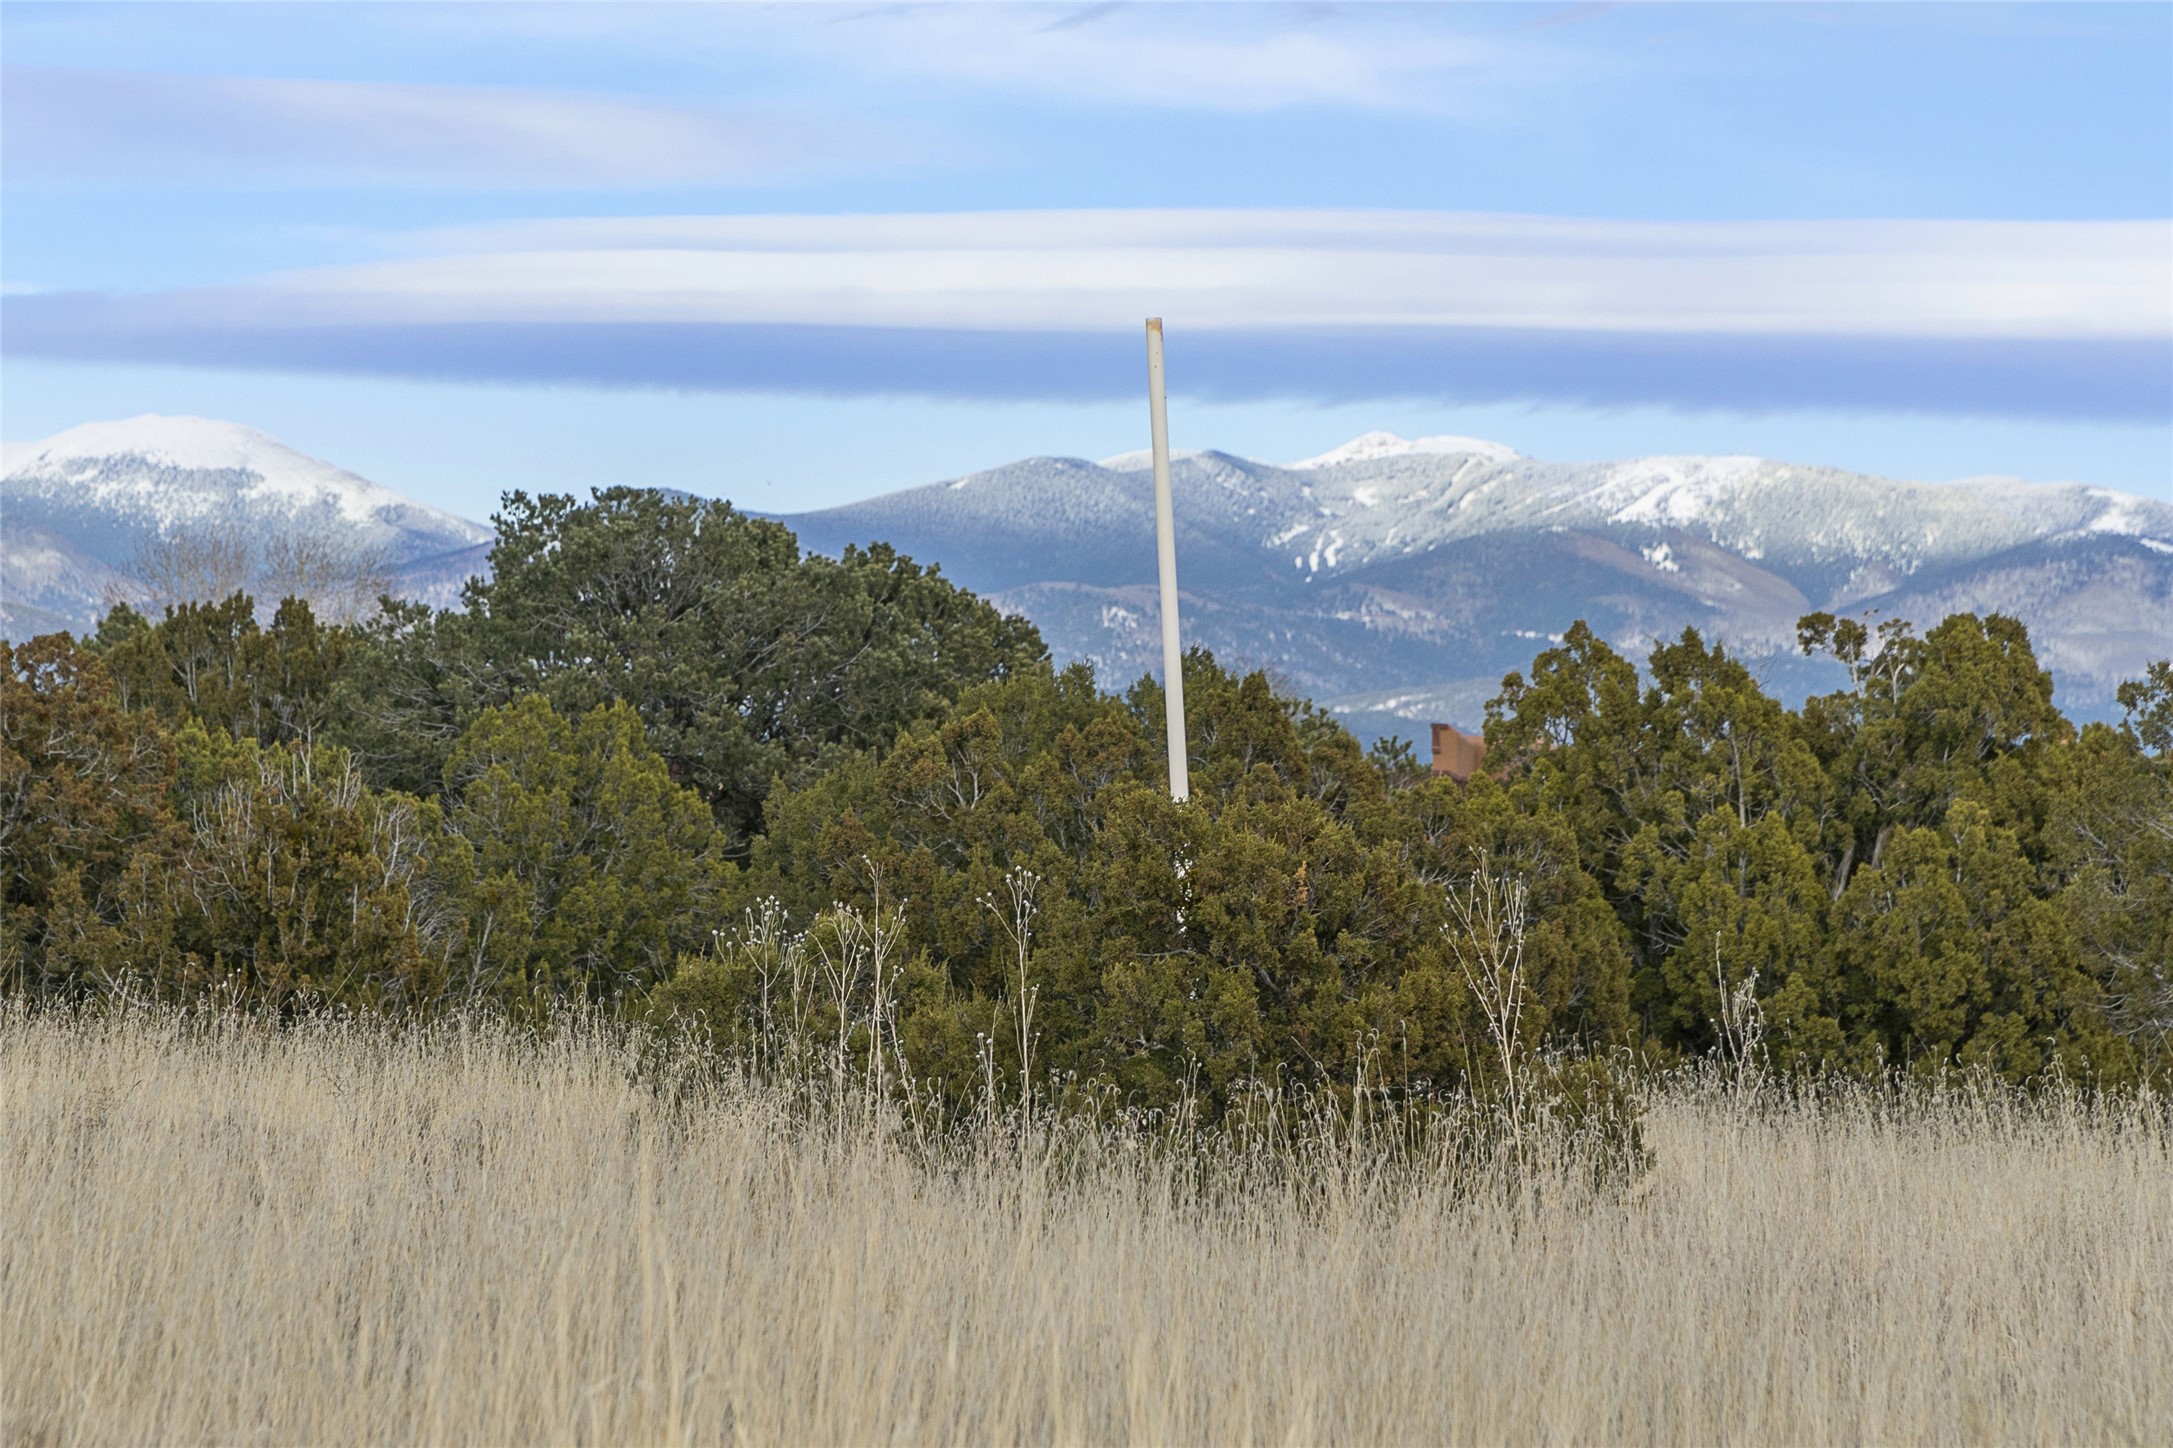 View from the Homesite to Baldy on the Left & the Santa Fe Ski Area in the Sangre de Cristo mountains